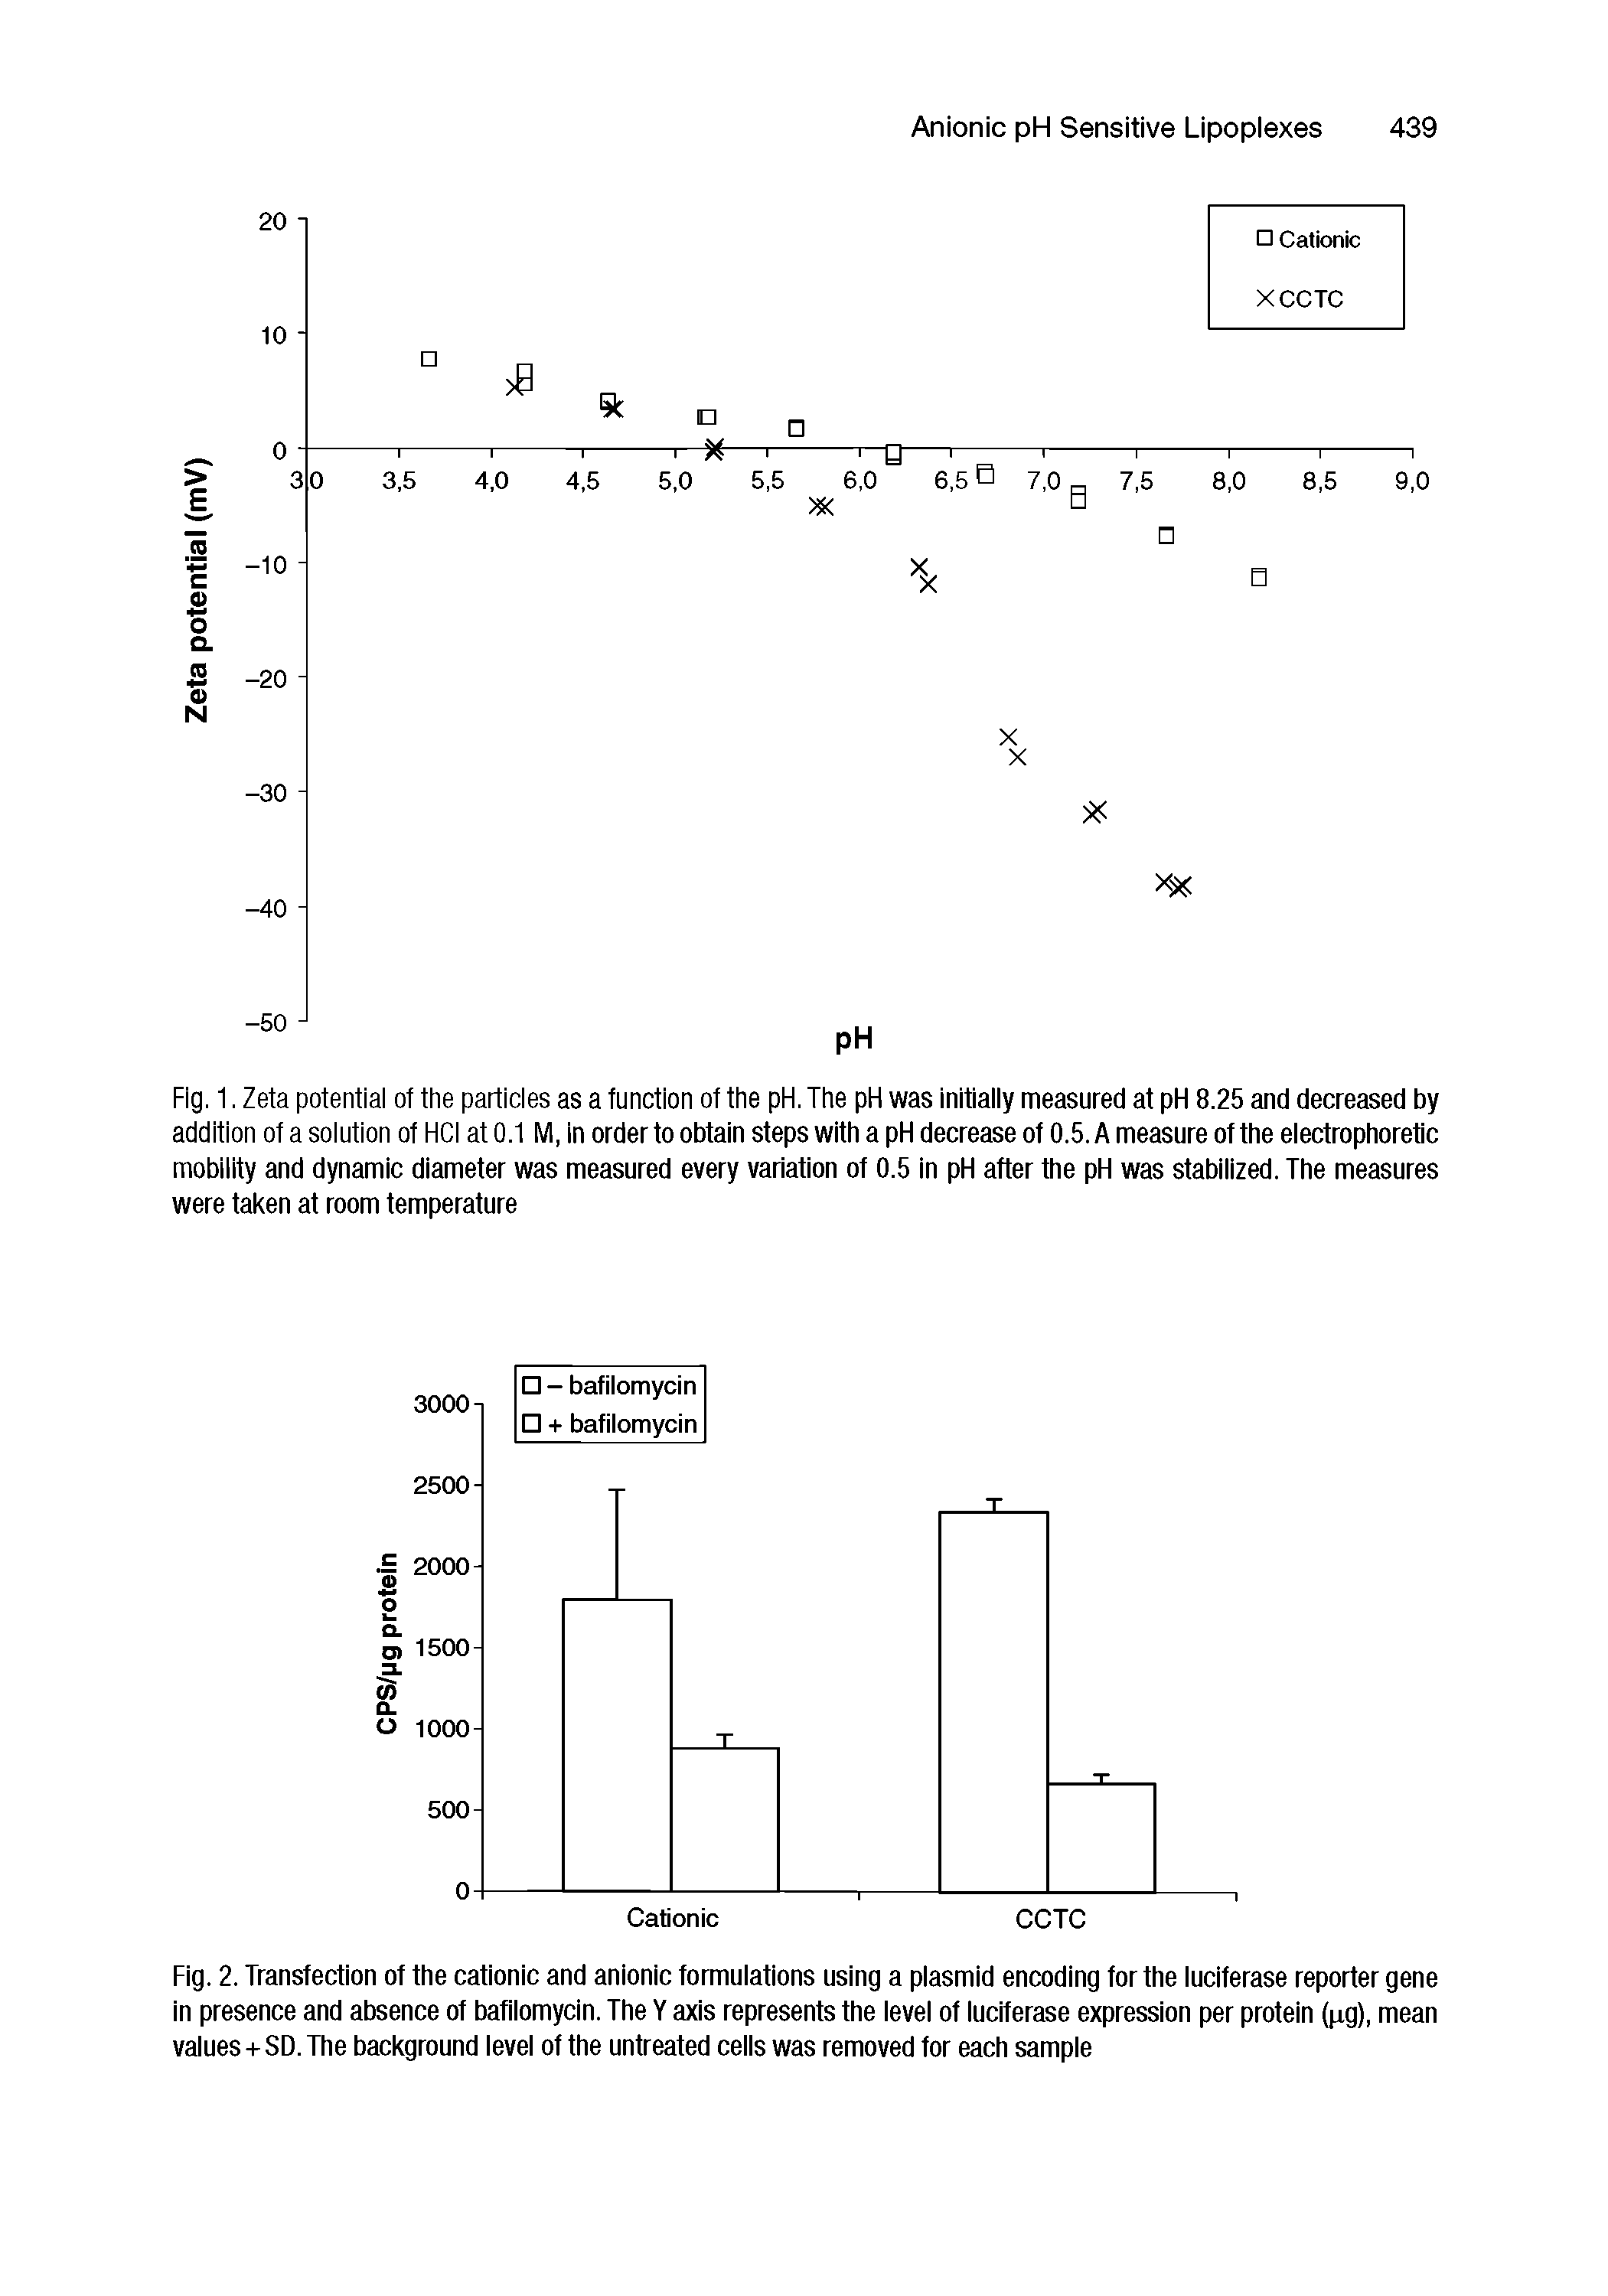 Fig. 2. Transfection of the cationic and anionic formulations using a plasmid encoding for the luciferase reporter gene in presence and absence of bafilomycin. The Y axis represents the level of luciferase expression per protein (p.g), mean values+SD. The background level of the untreated cells was removed for each sample...